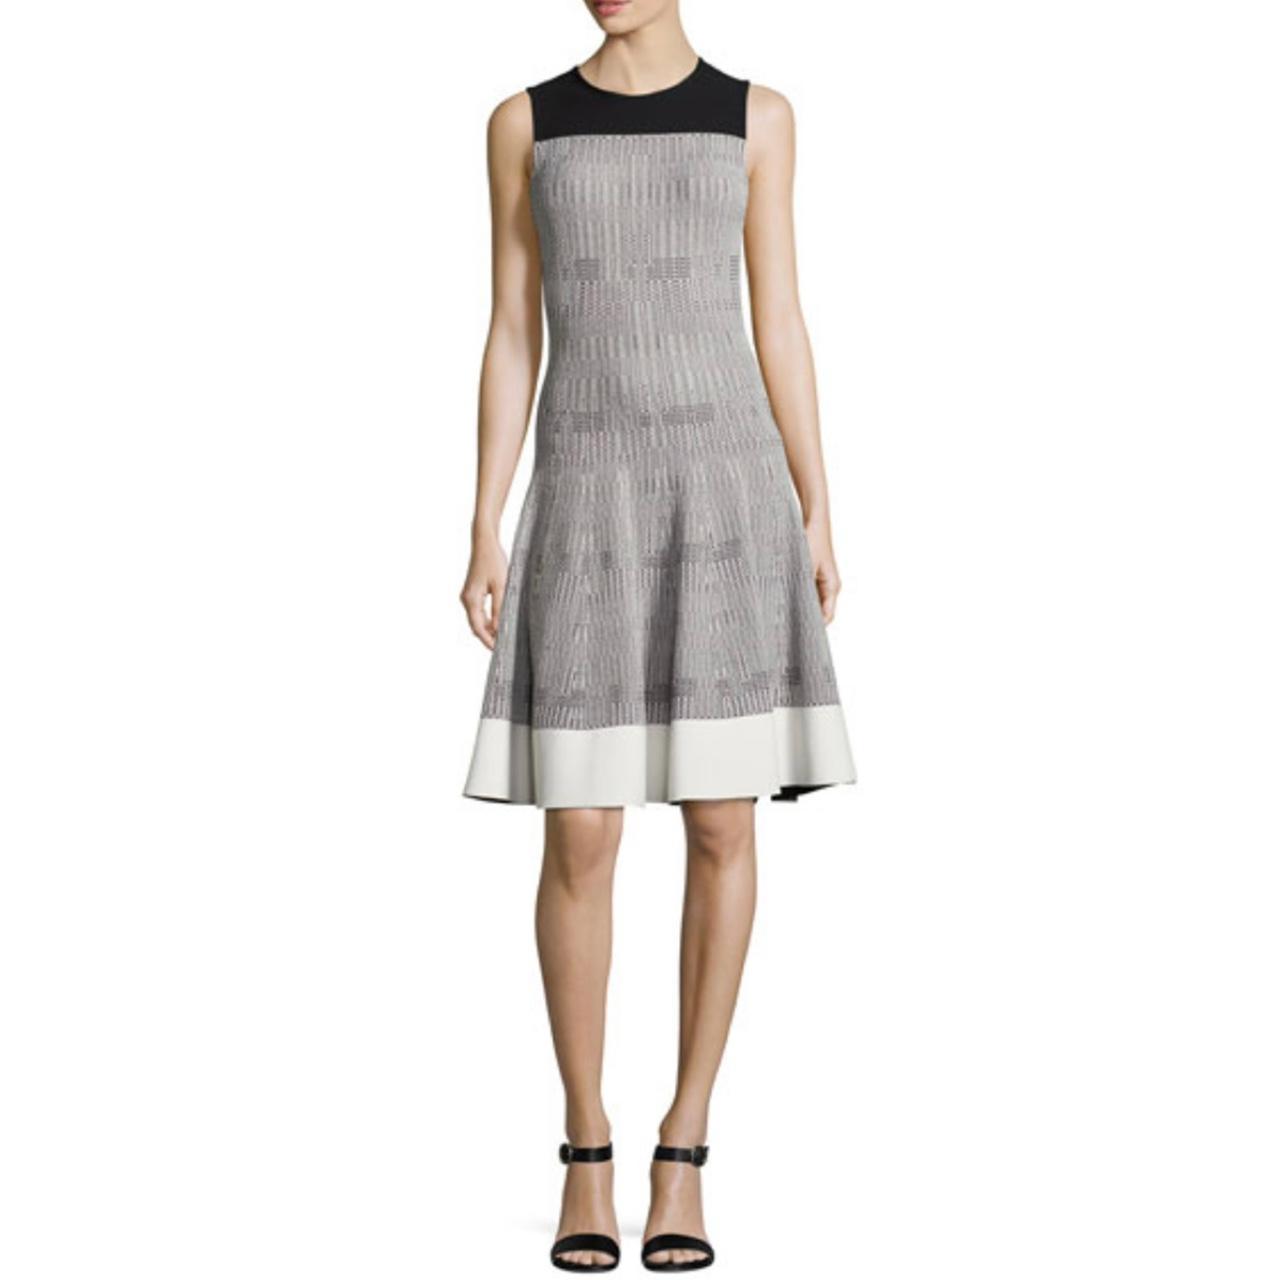 Narciso Rodriguez Women's Black and White Dress